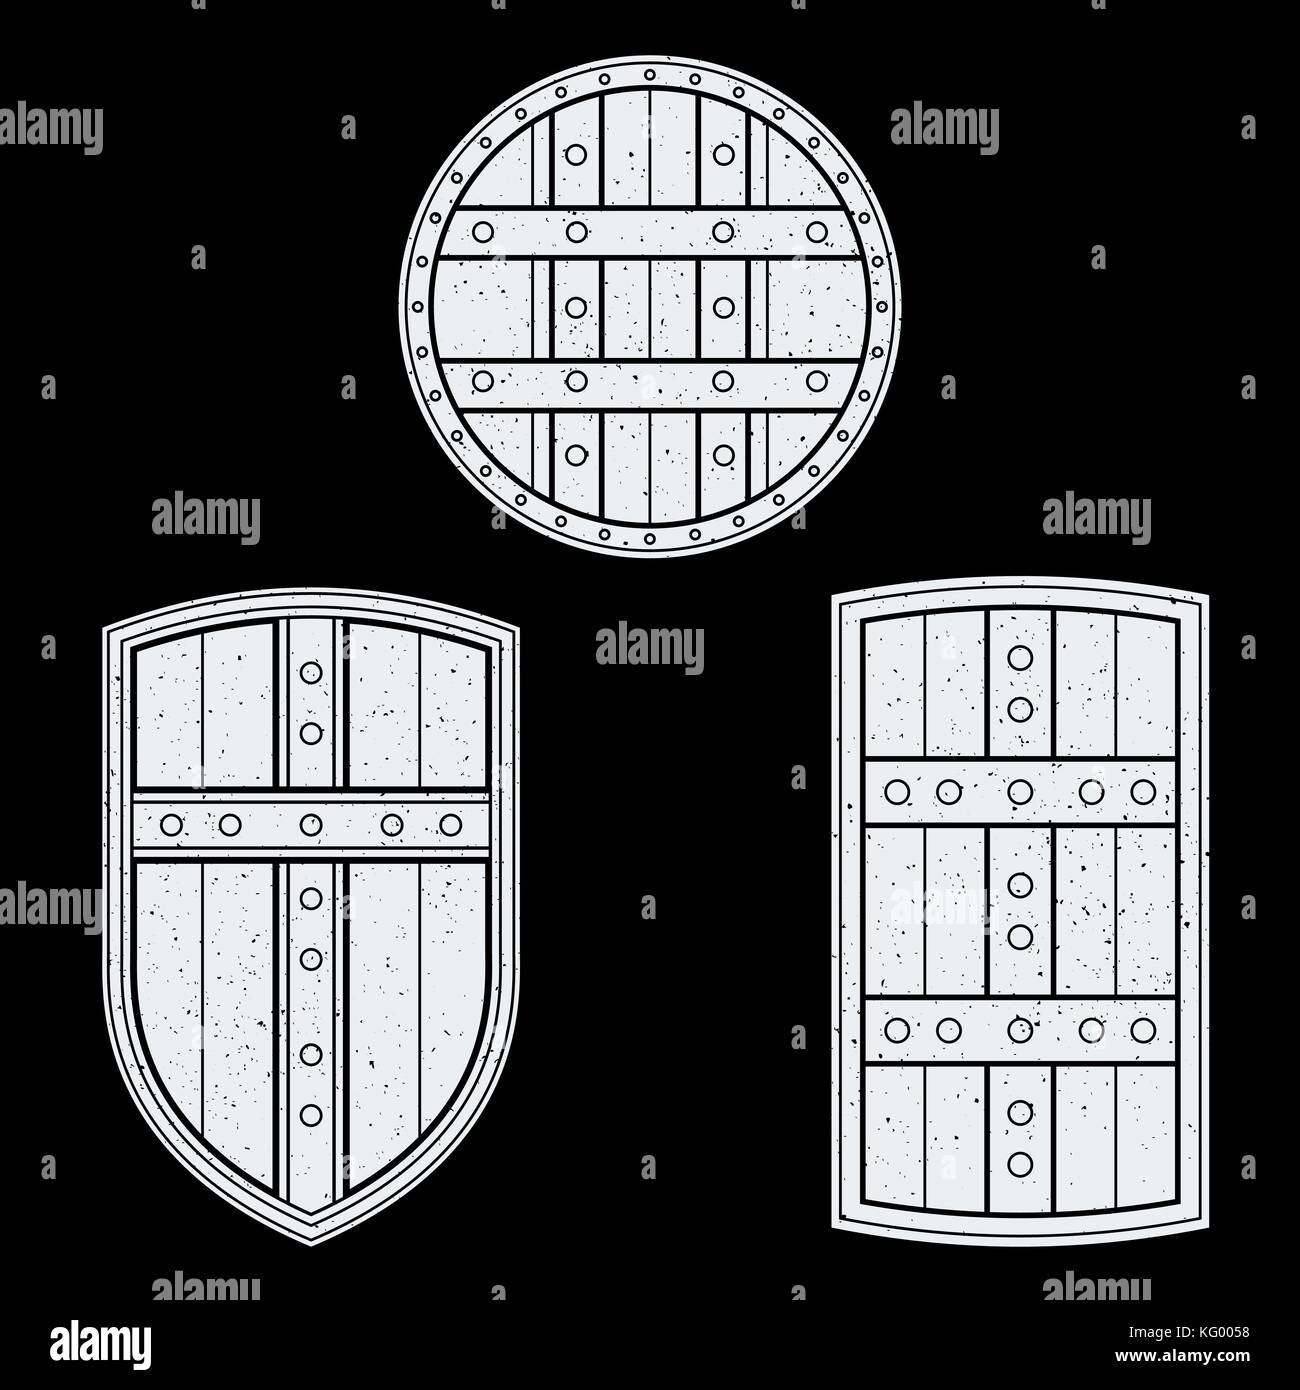 vector light monochrome solid design various medieval shields grunge textured cold steel arms set isolated on black background Stock Vector